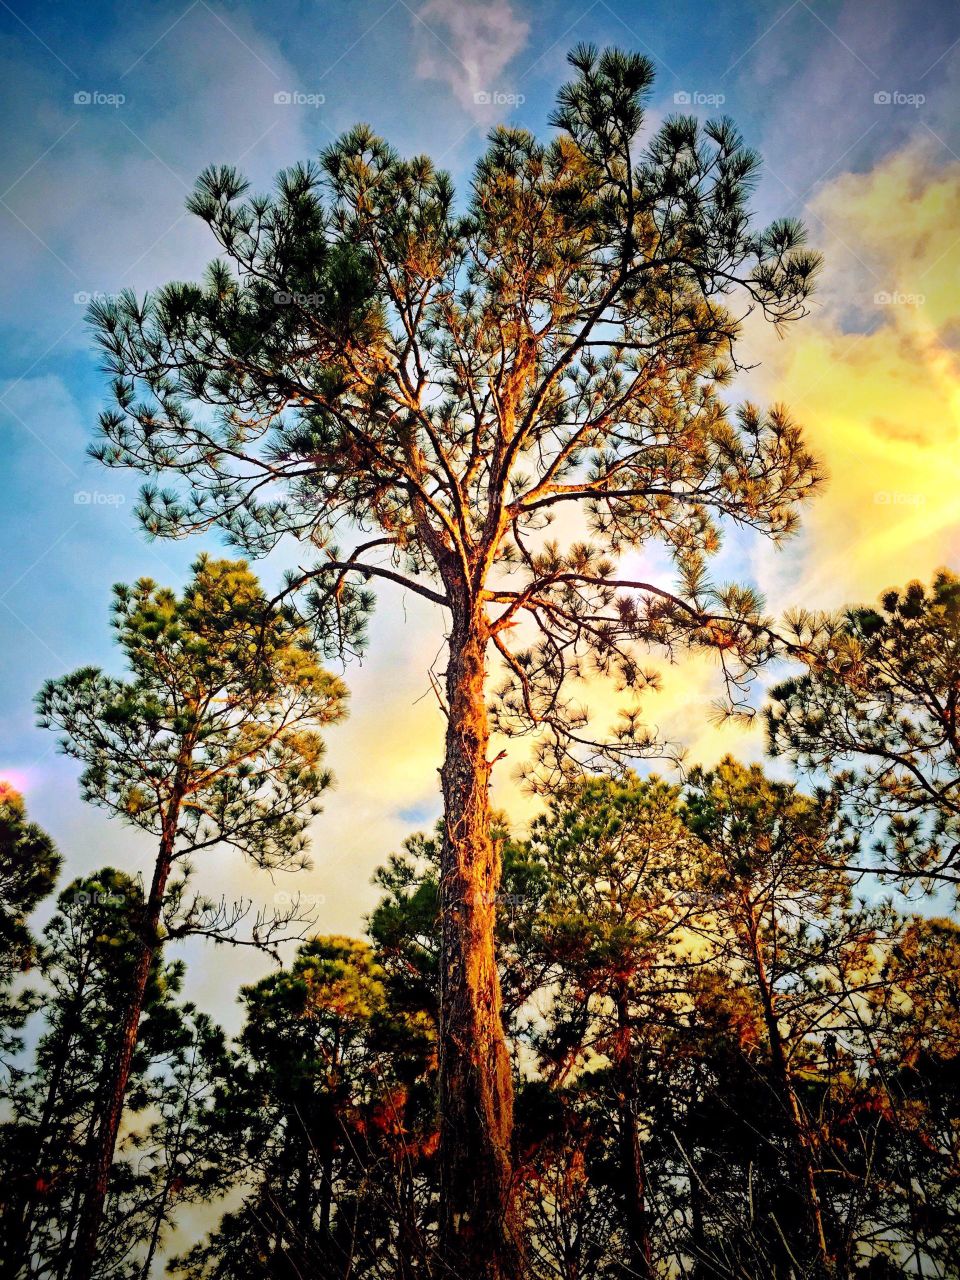 Tall pine tree. Looking up at a tall pine tree in the golden hour.